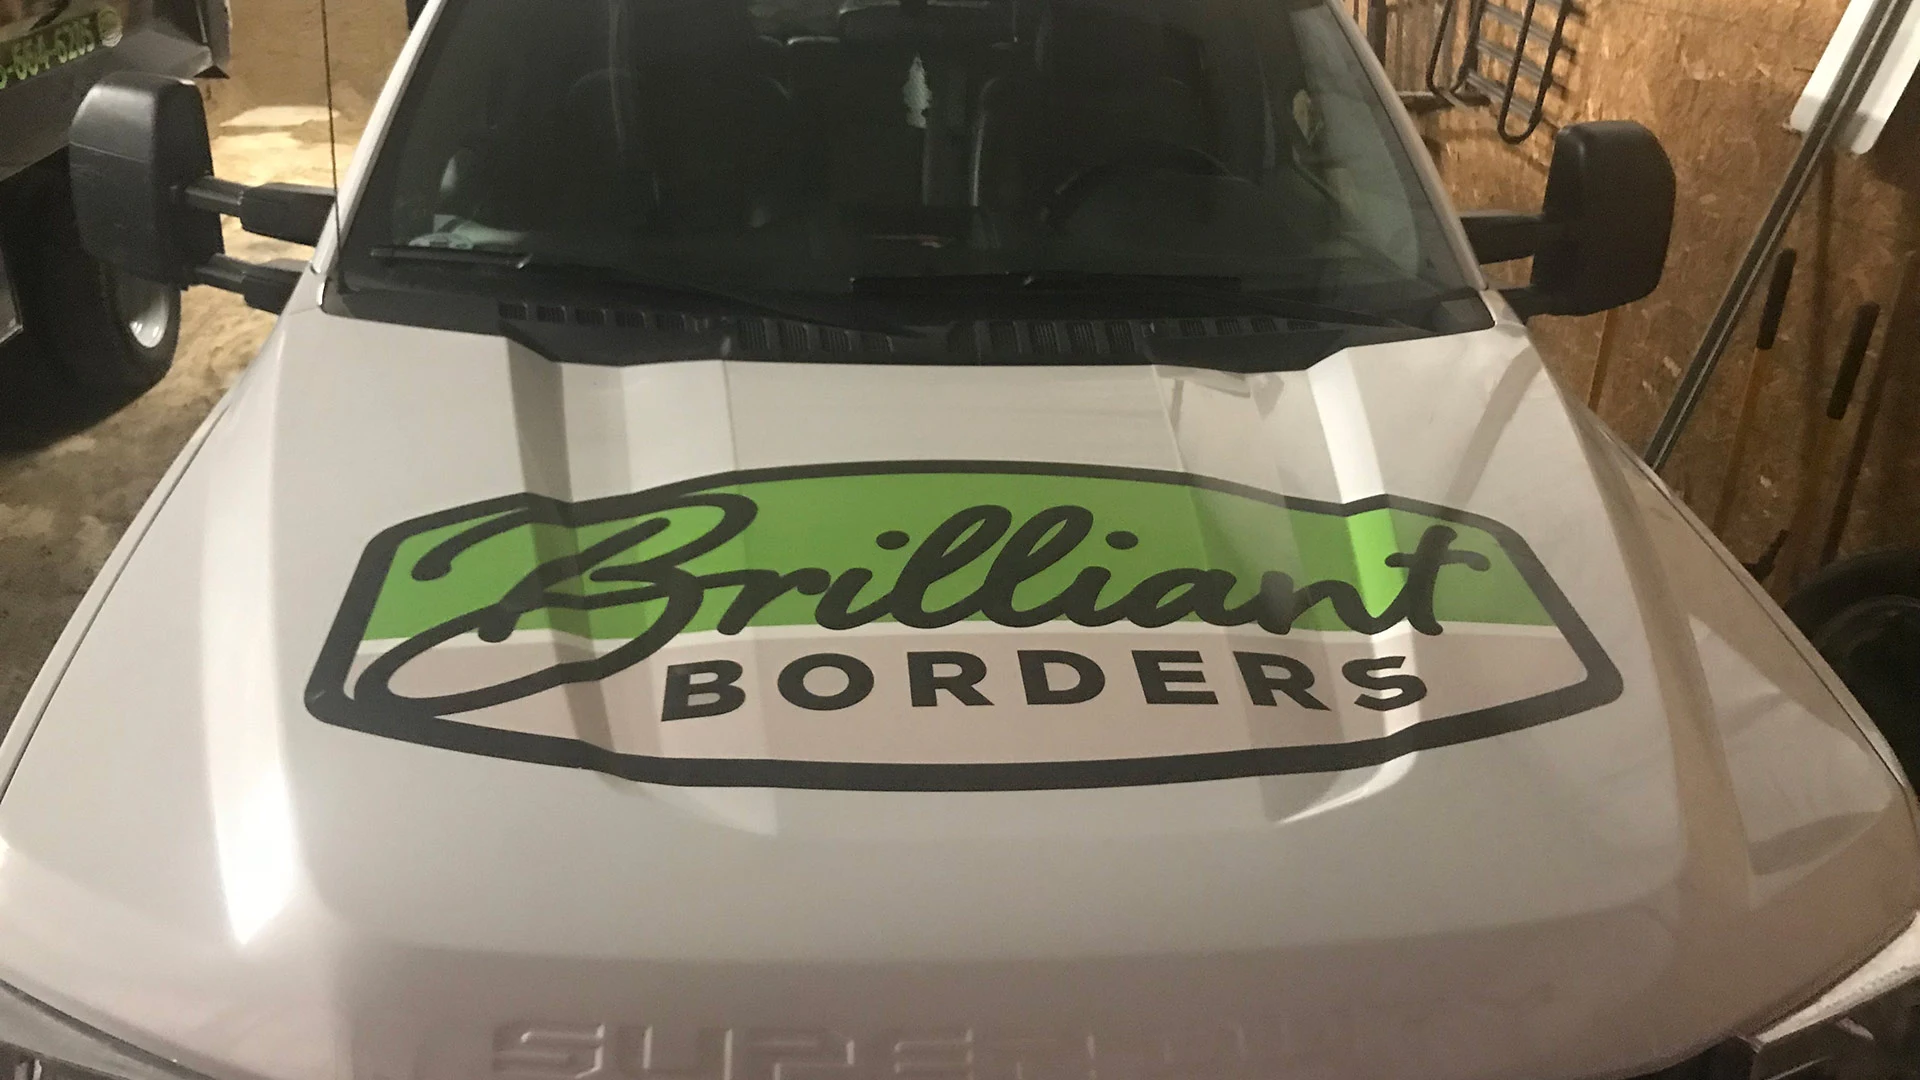 Branded hood on work truck in Clive, IA.